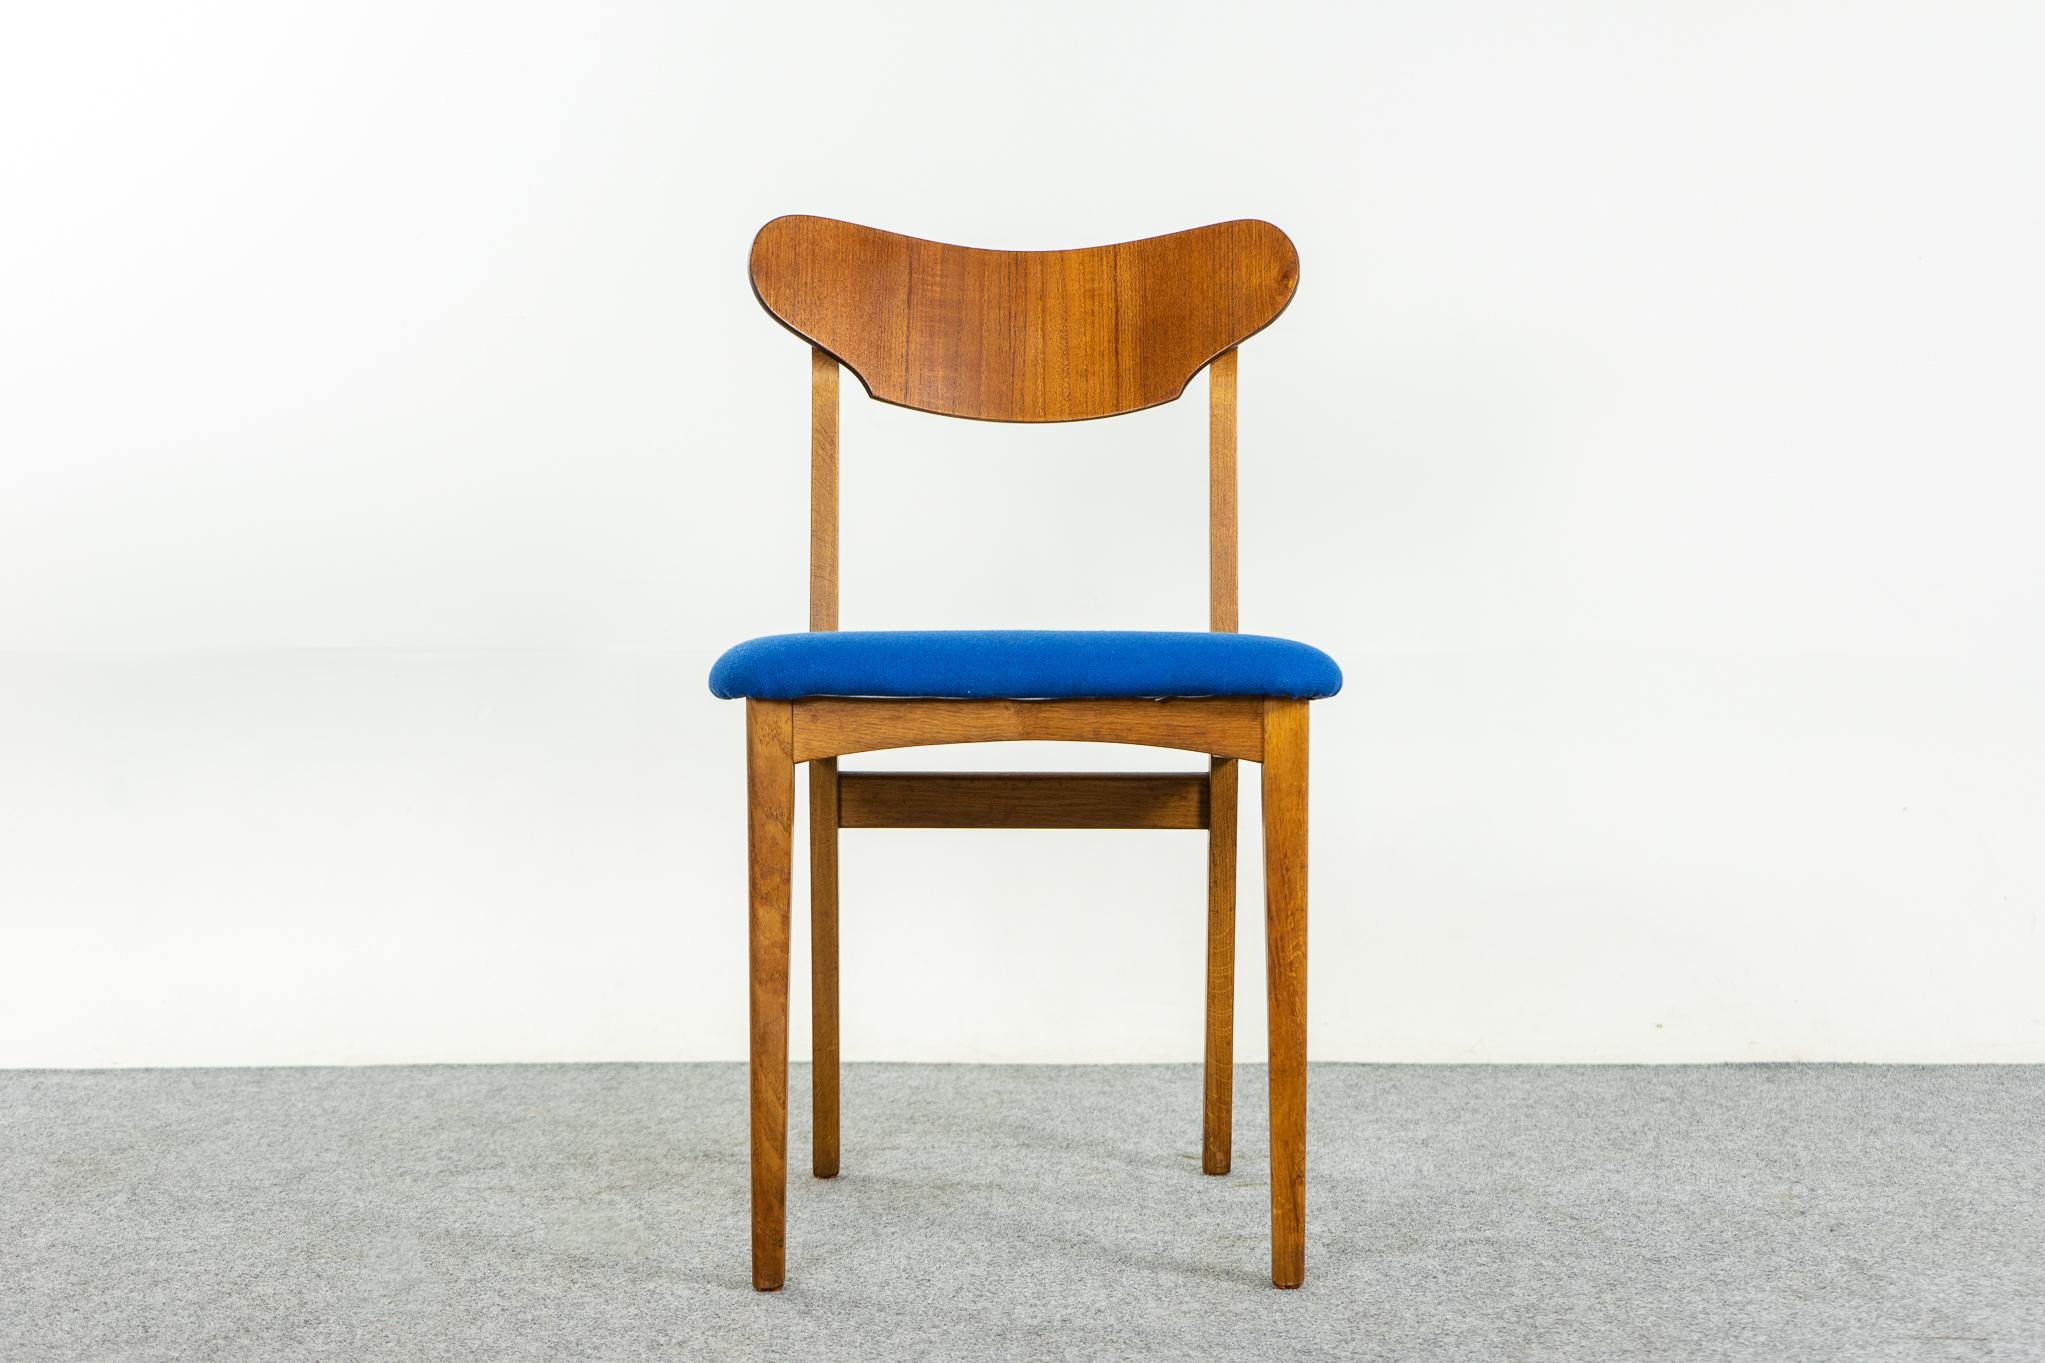 Teak & oak Danish dining chairs, circa 1960's. Beautifully curved teak backrests with unique shape, generous seat provides support and comfort. Solid oak frame with cross braces, for stability and support. Vibrant blue wool upholstery in great